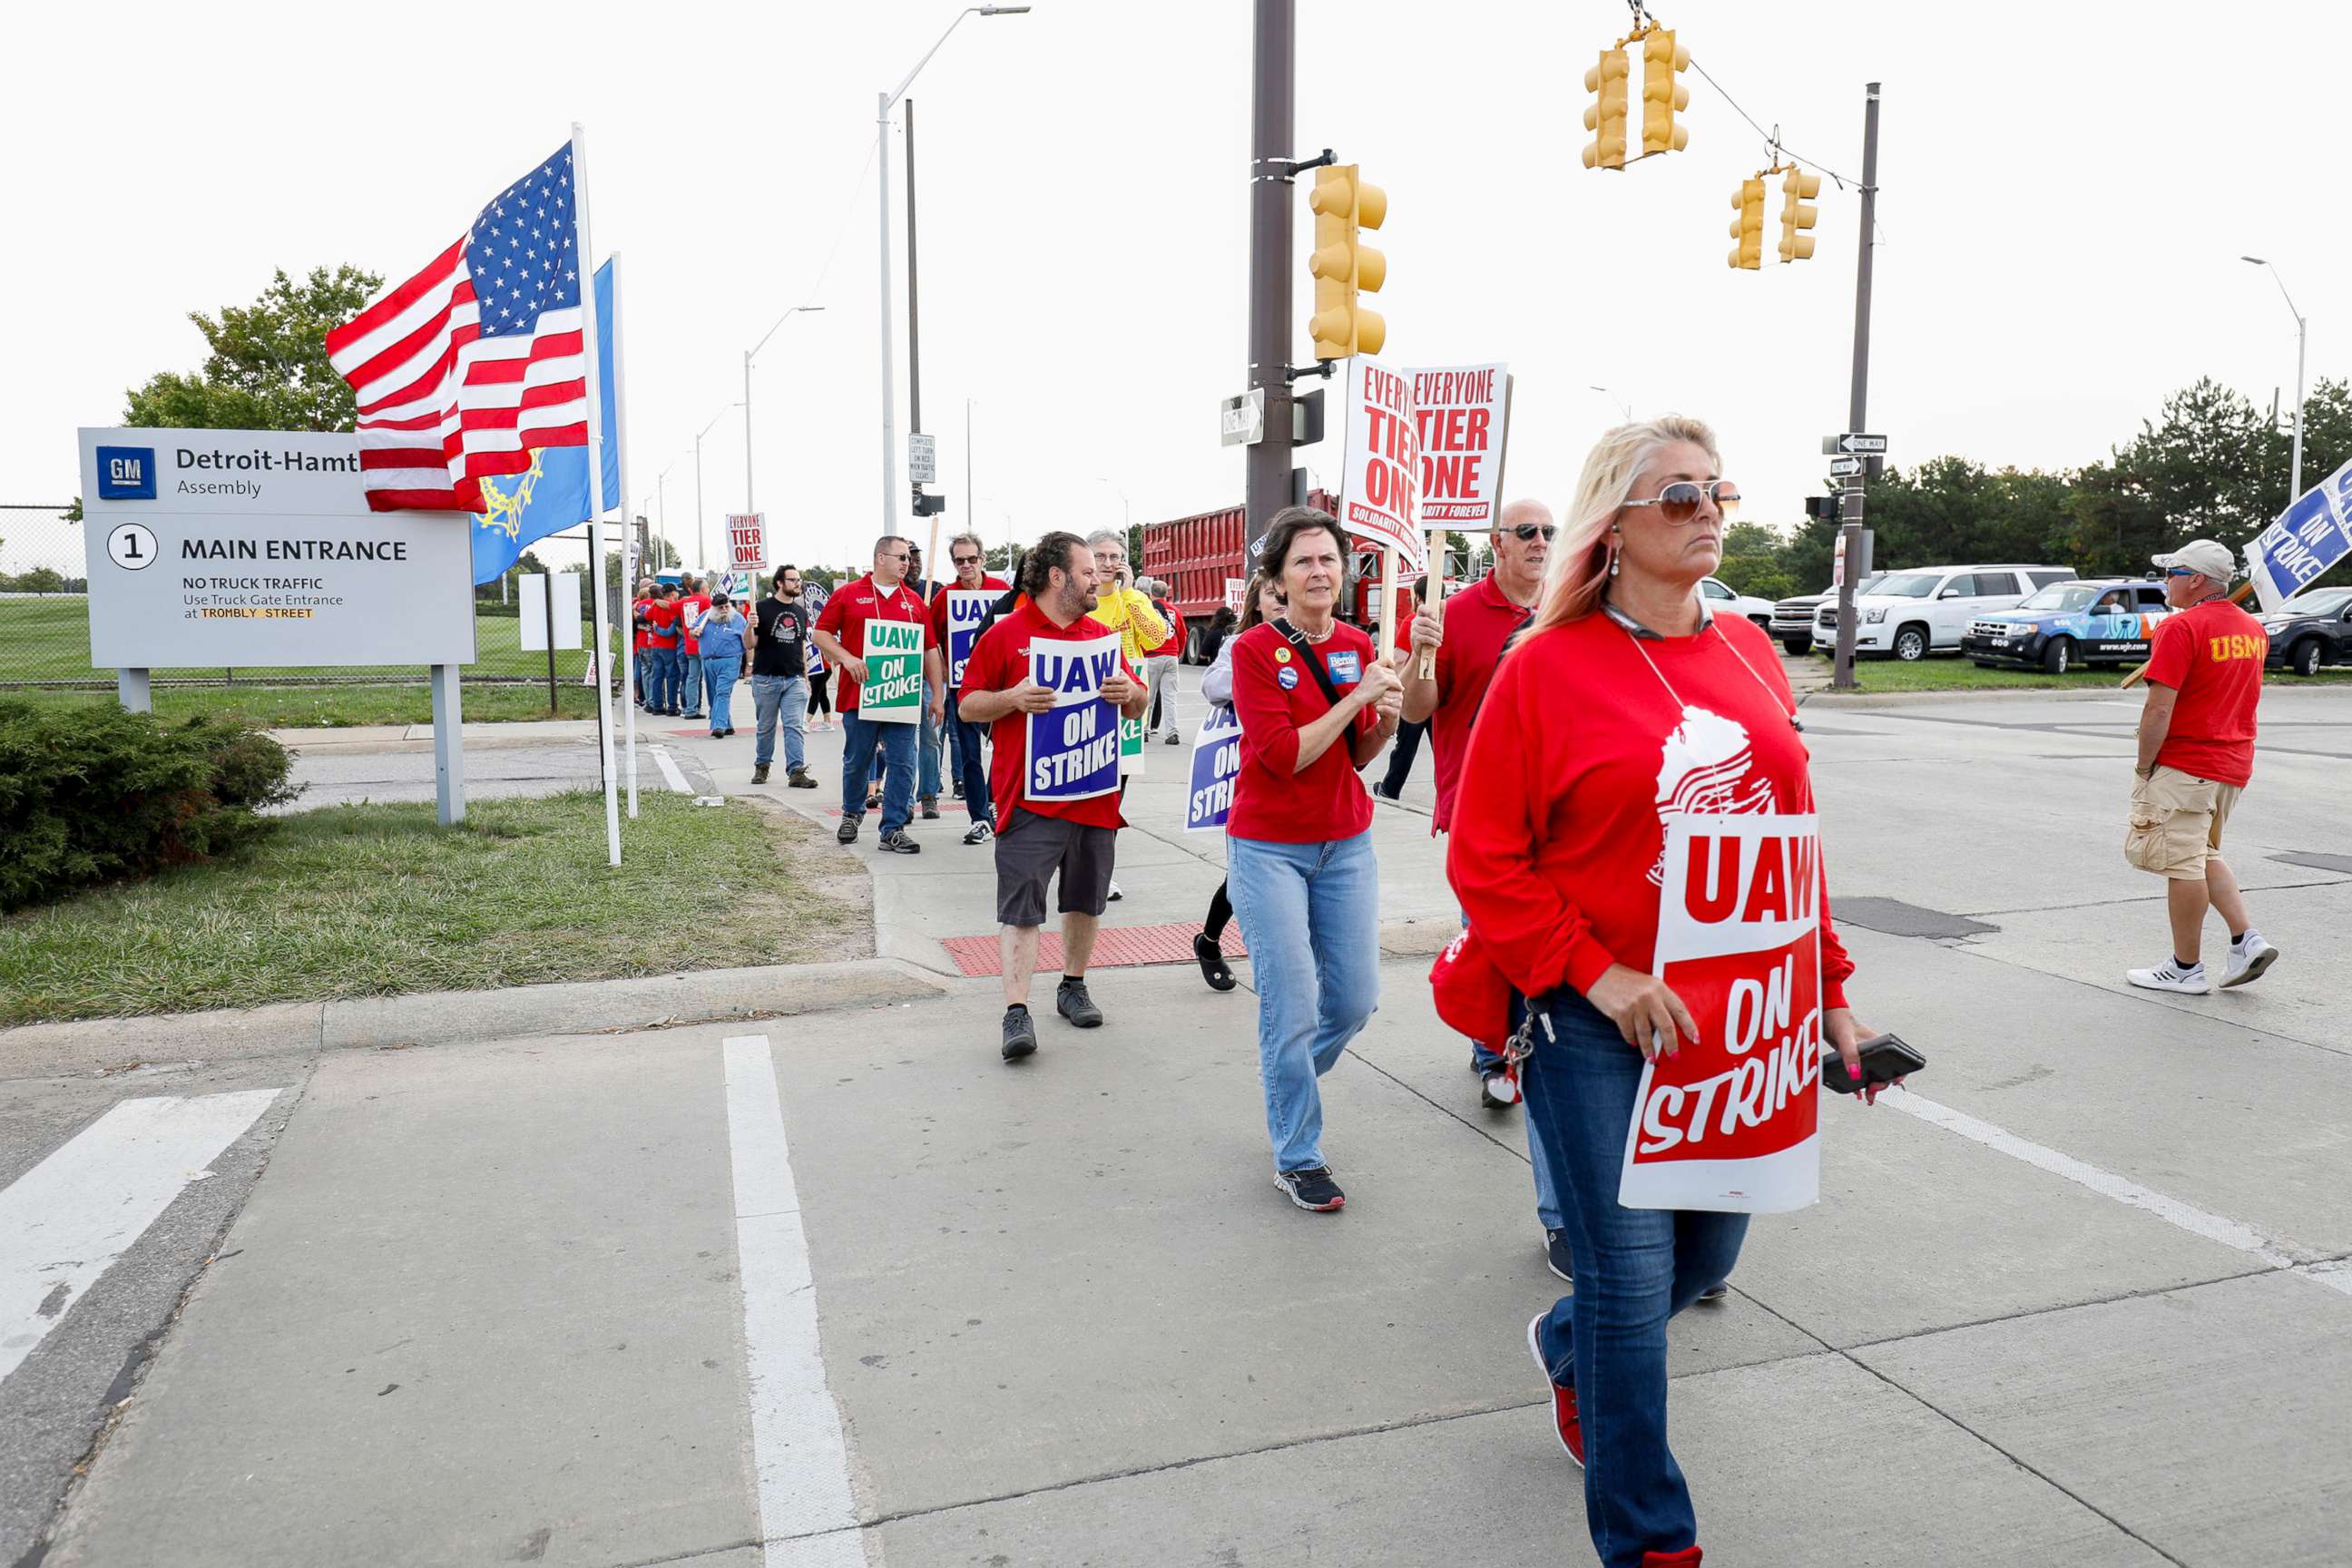 PHOTO: Striking United Auto Workers union members picket at the General Motors Detroit-Hamtramck Assembly Plant on September 25, 2019, in Detroit, Michigan.